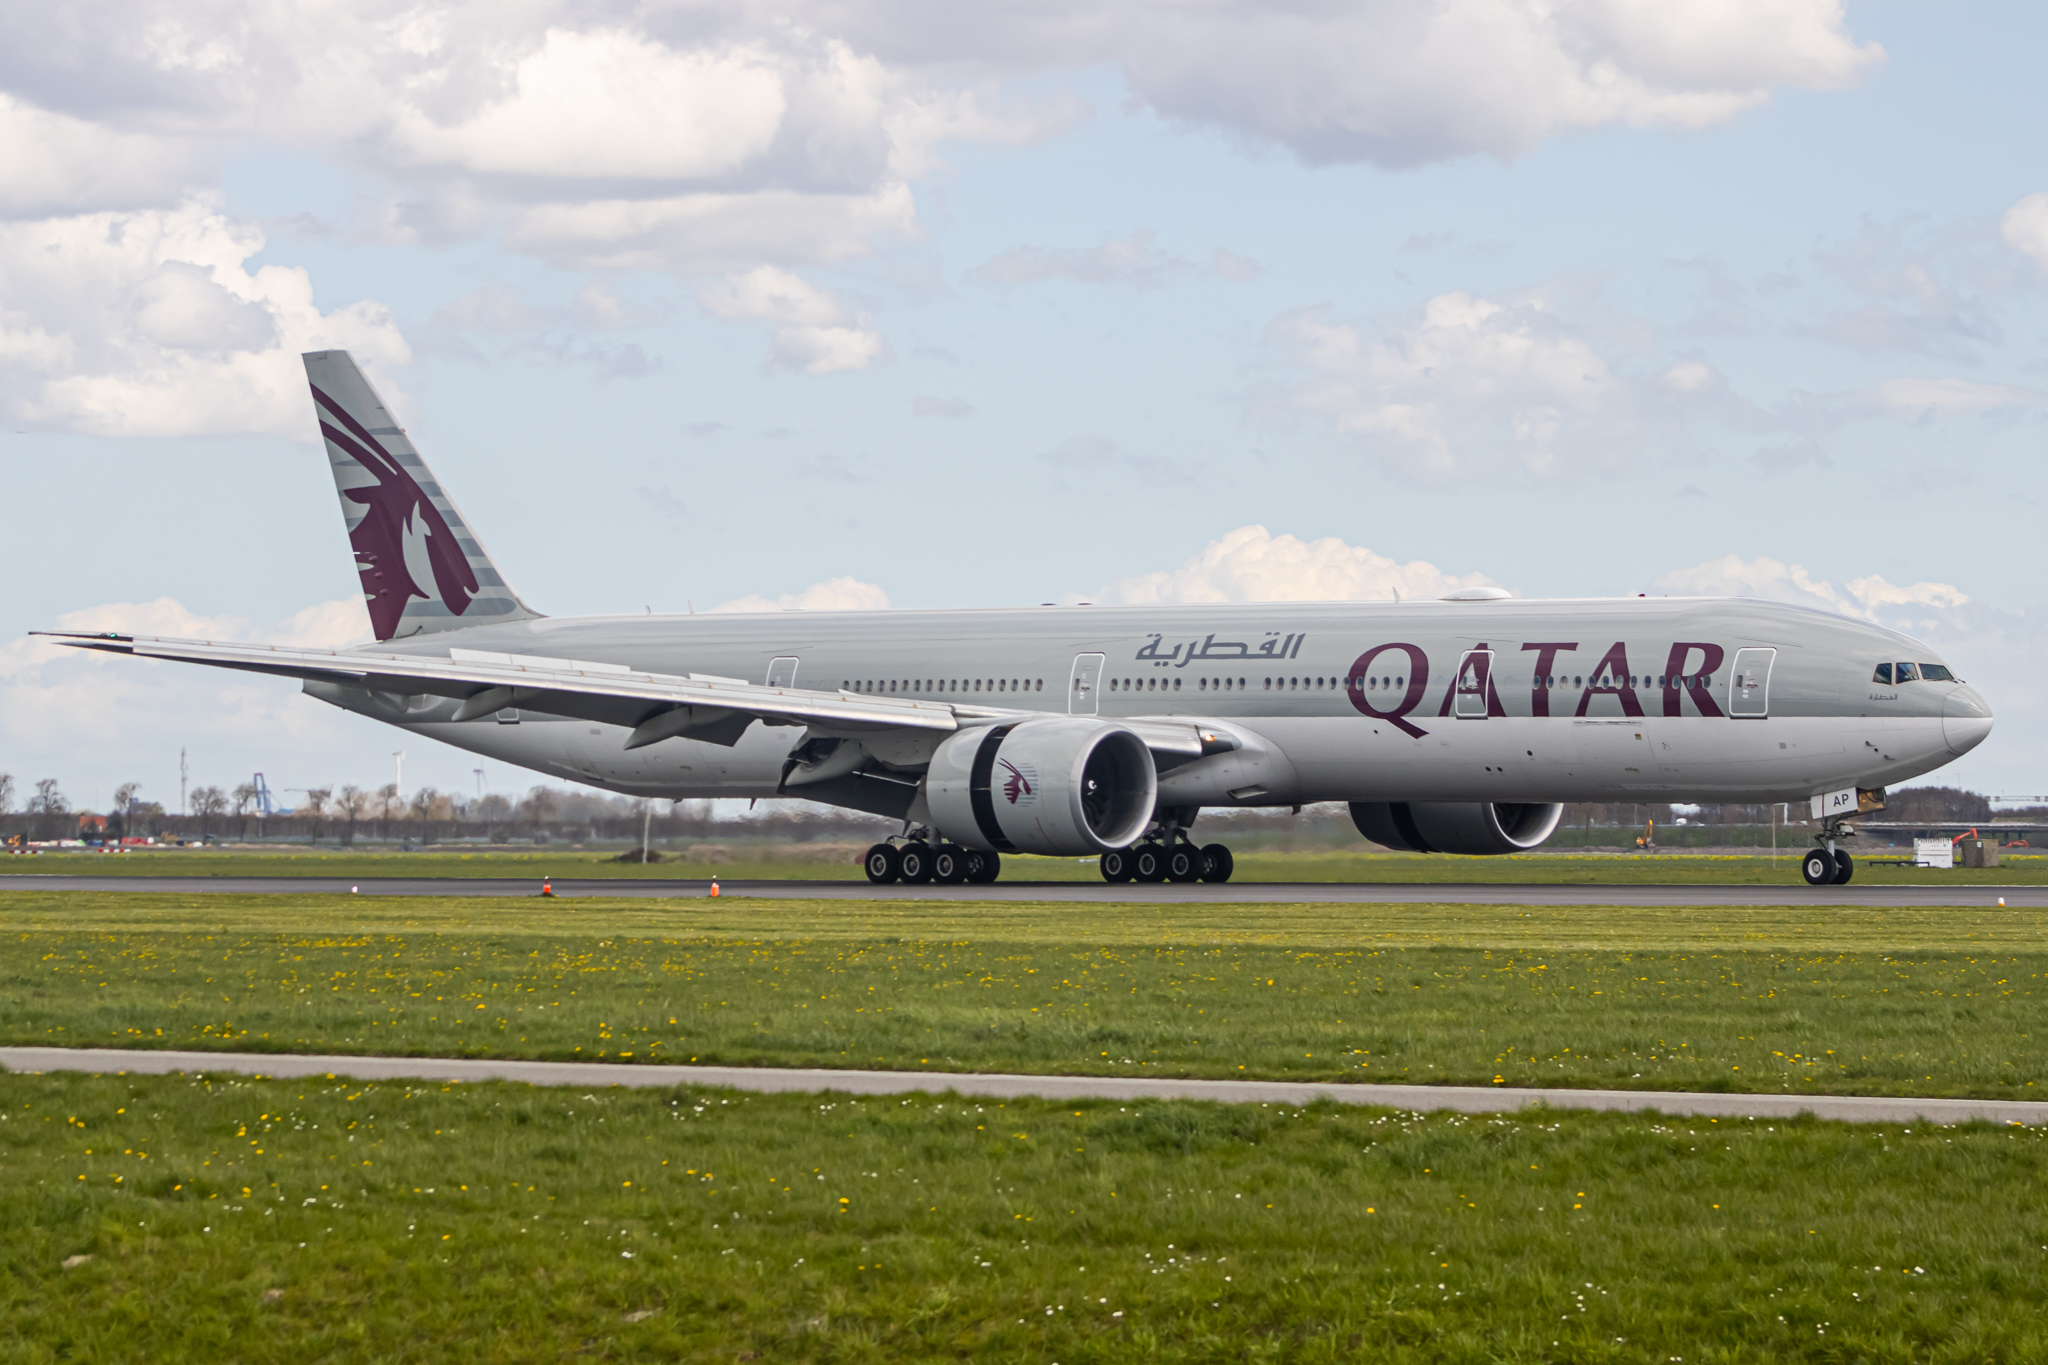 The Most Active in the Middle East?: Qatar Airways